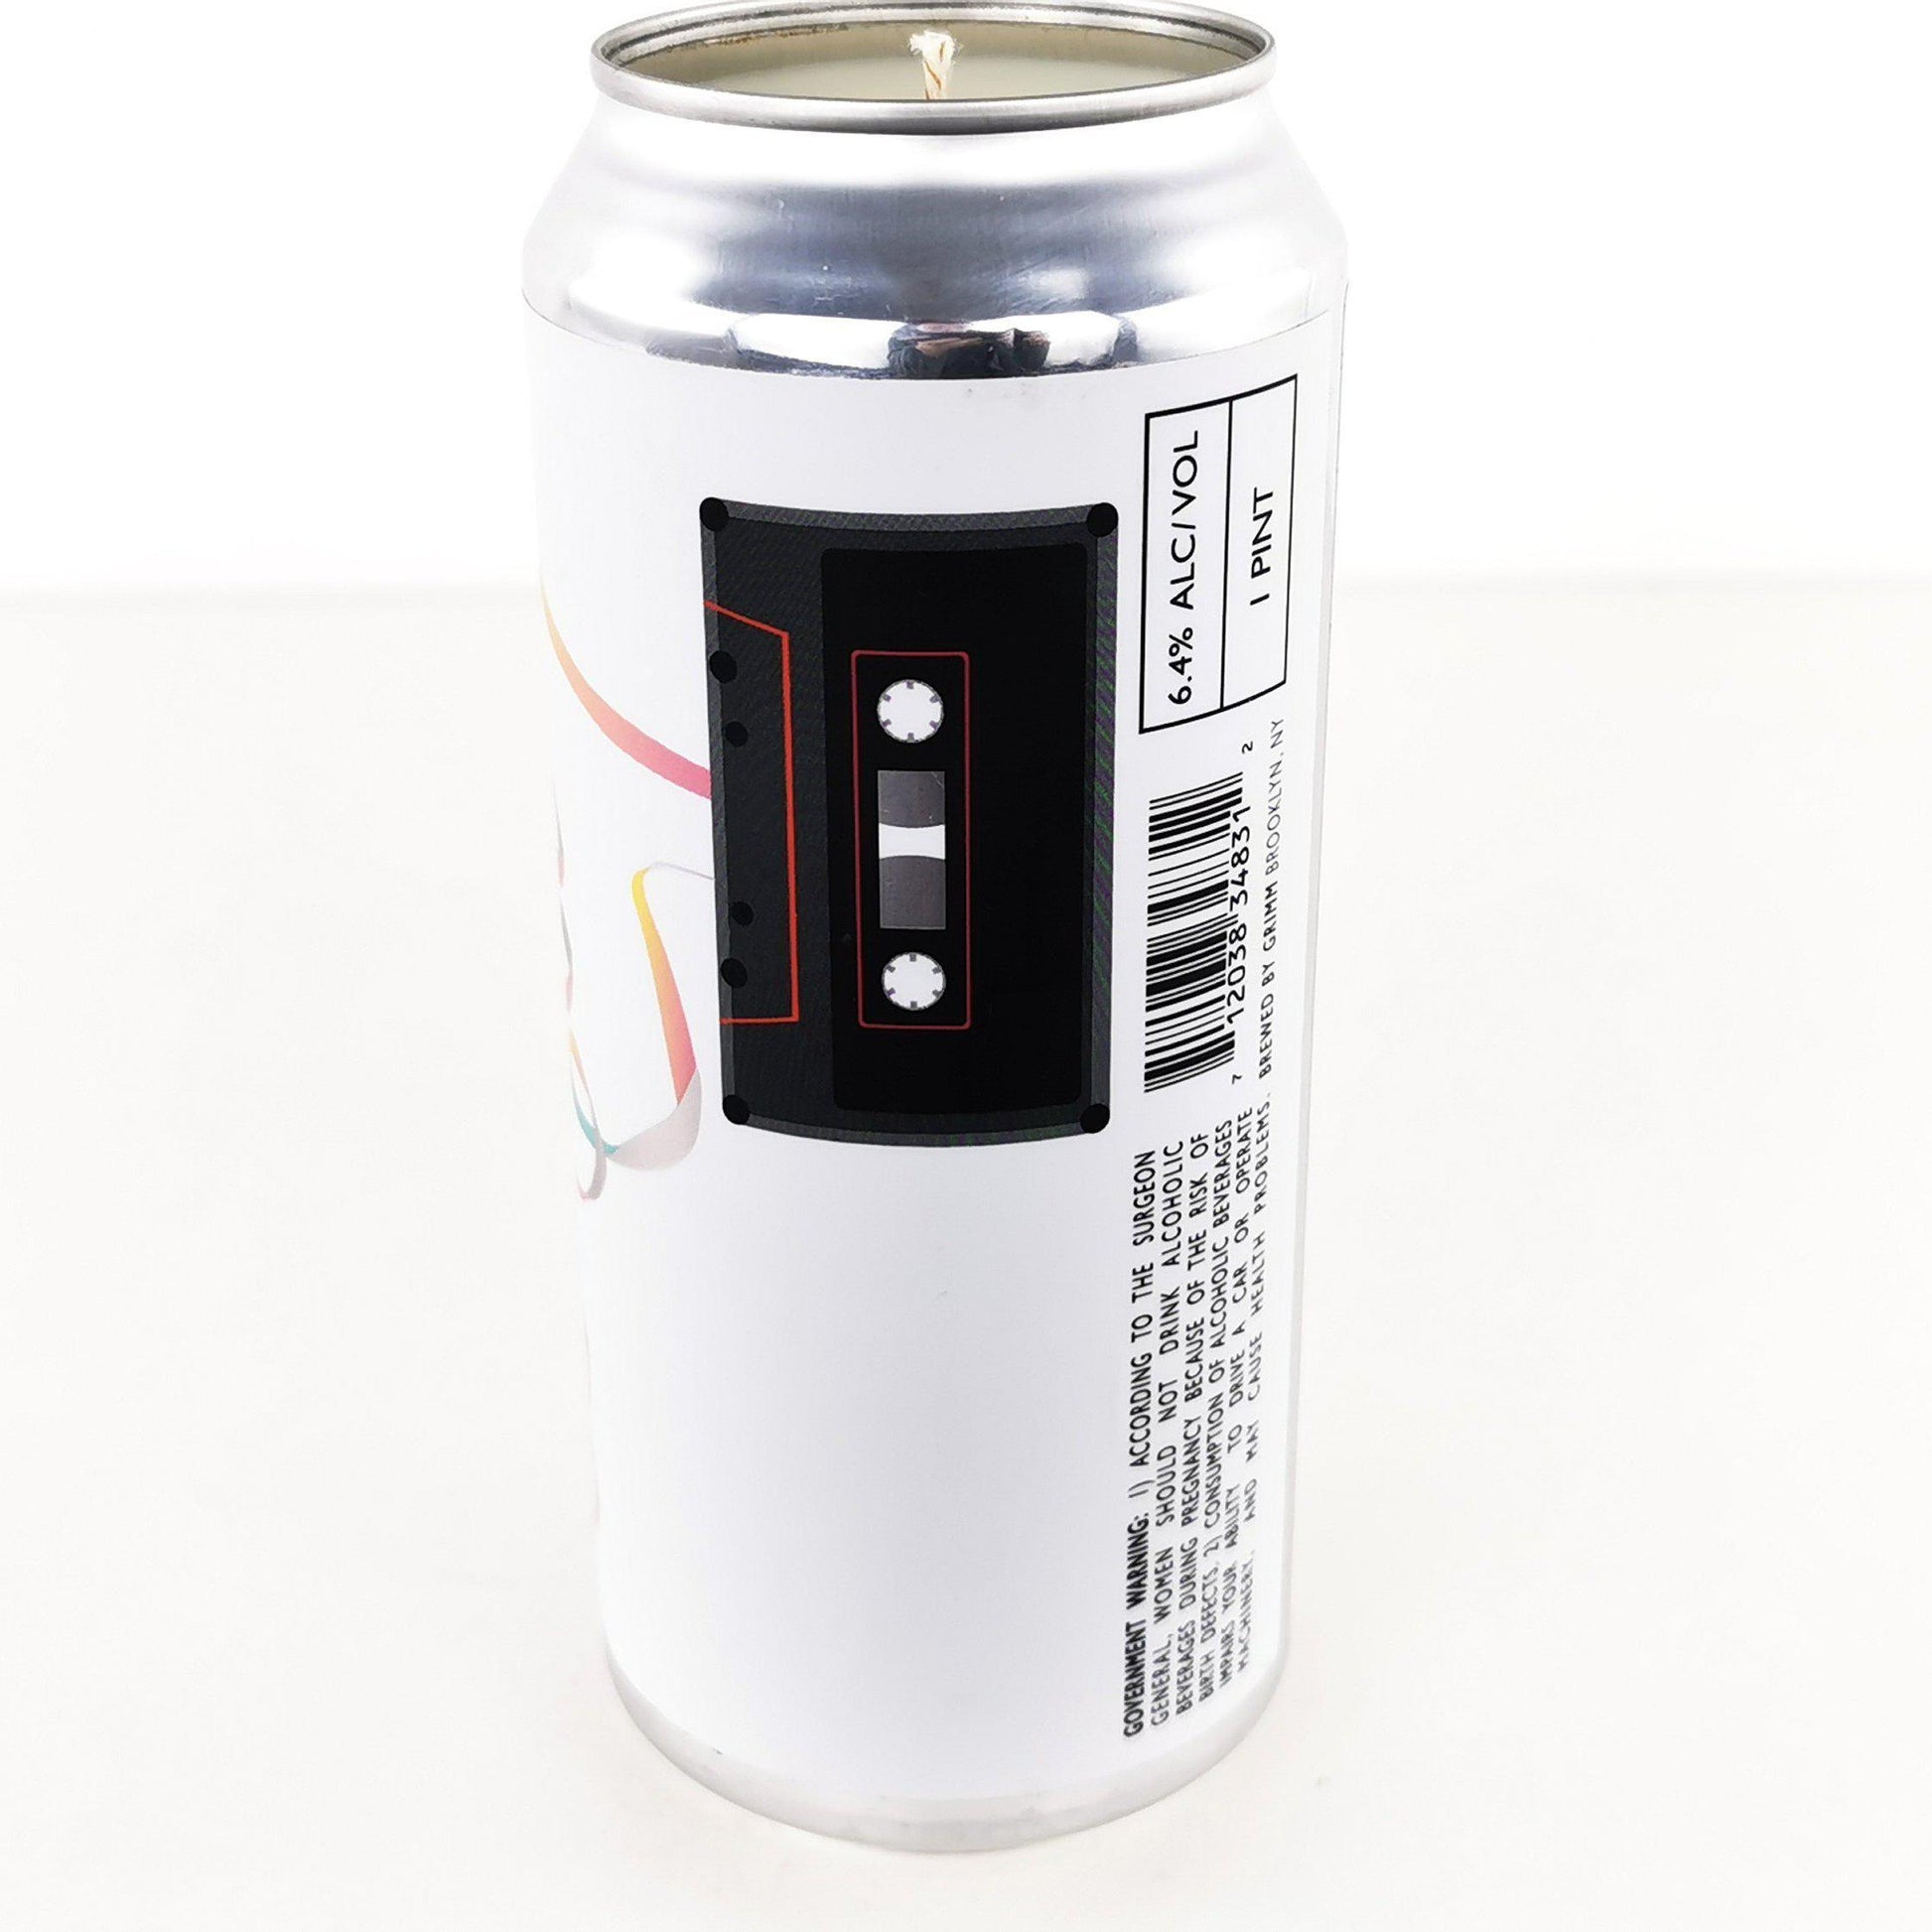 Grimm Artisanal Magnetic Tape Craft Beer Can Candle-Beer Can Candles-Adhock Homeware